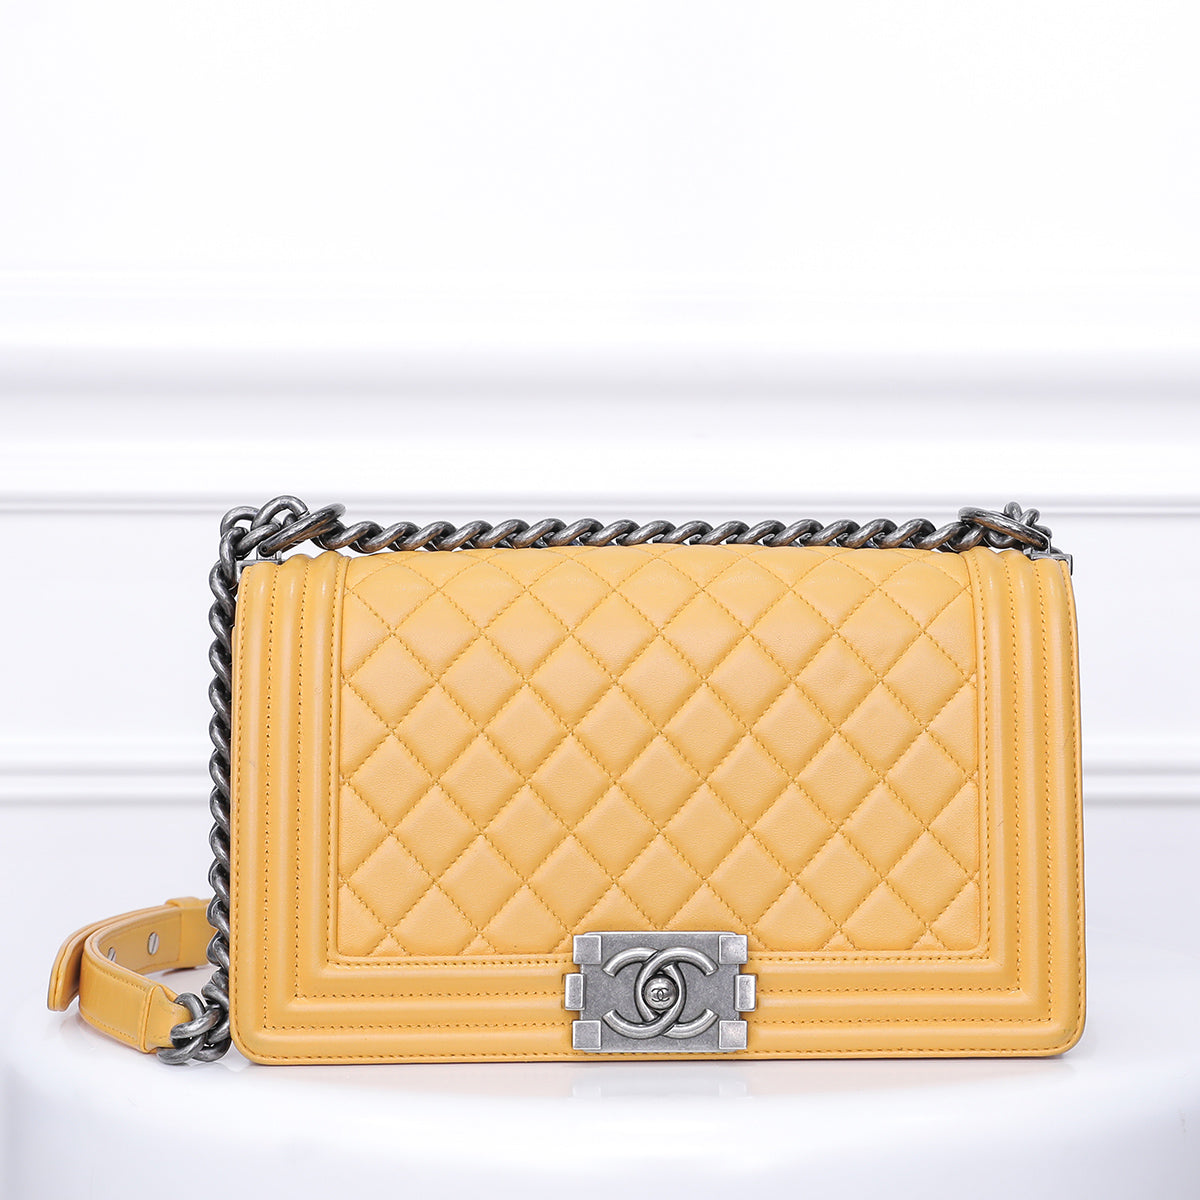 Chanel Yellow CC Quilted Boy Flap